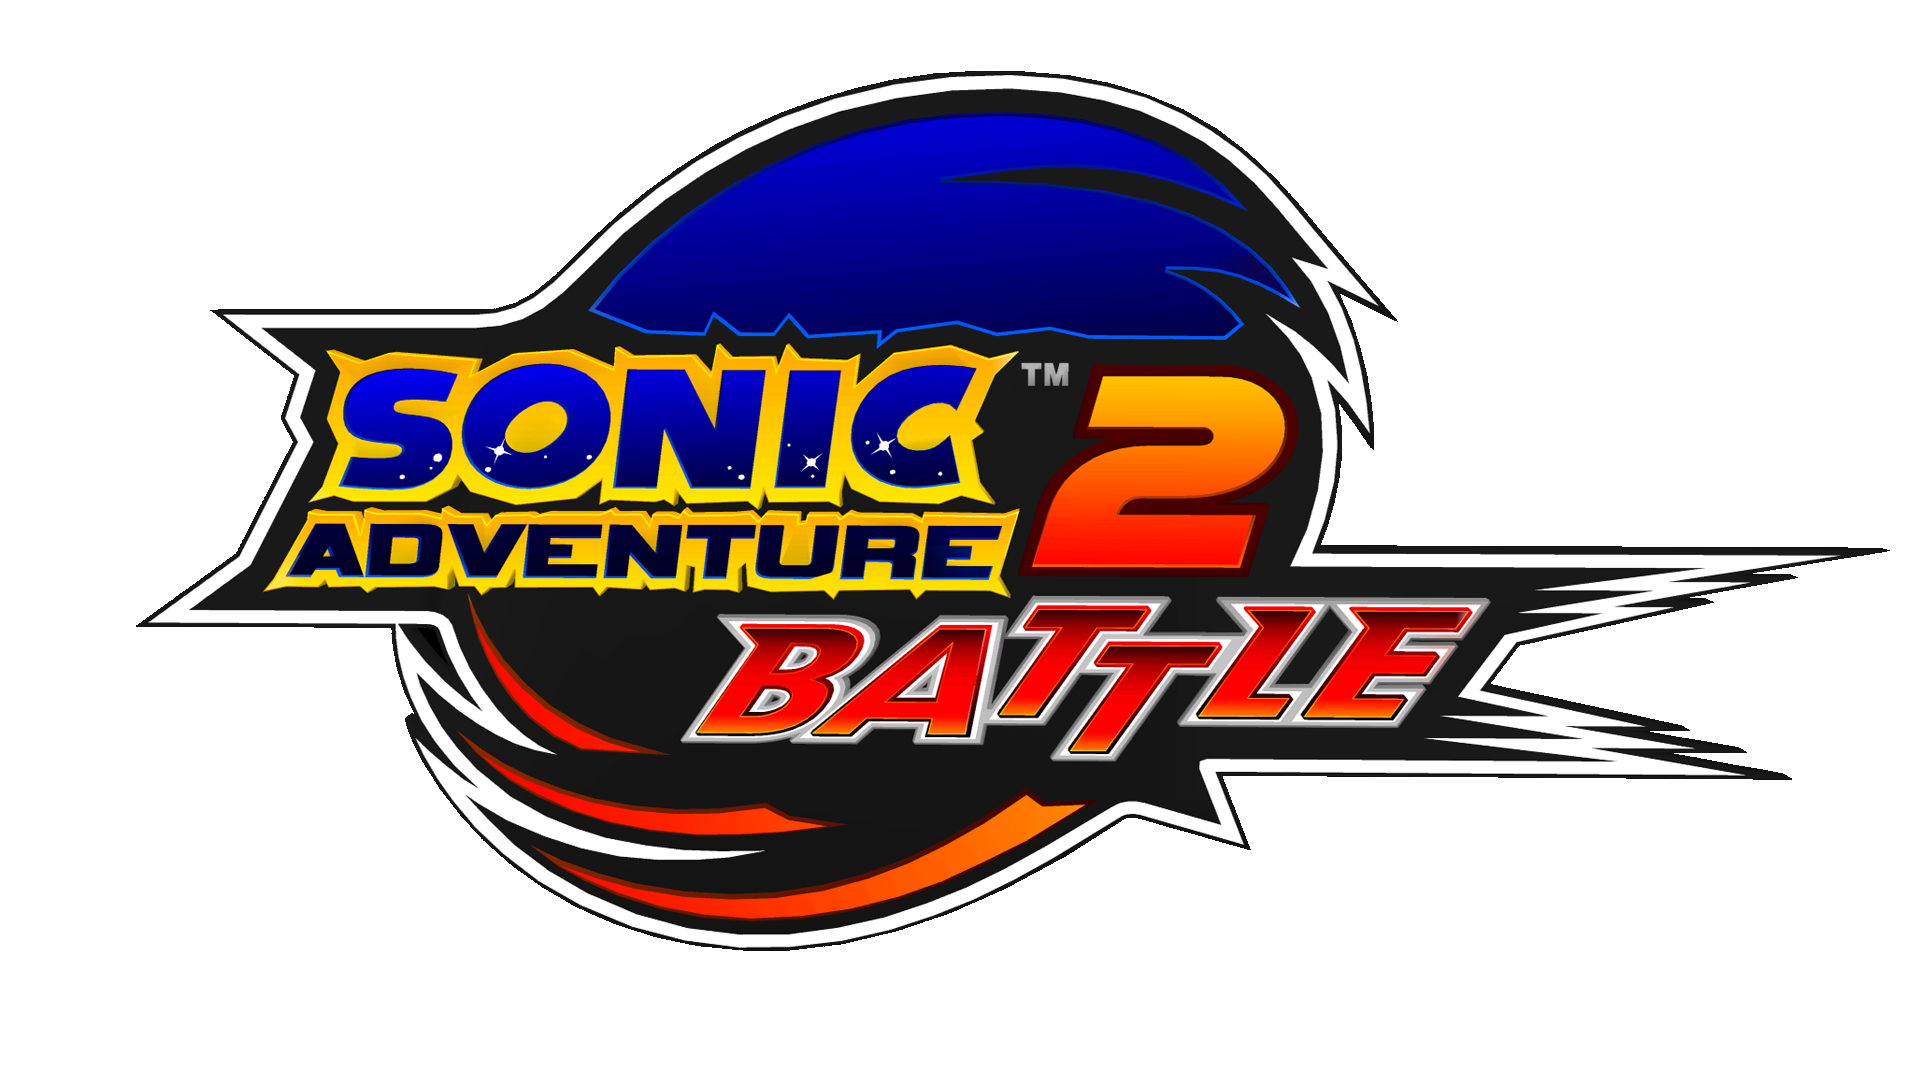 are the bight chaos gems in sonic adventure 2 battle for xbox 360